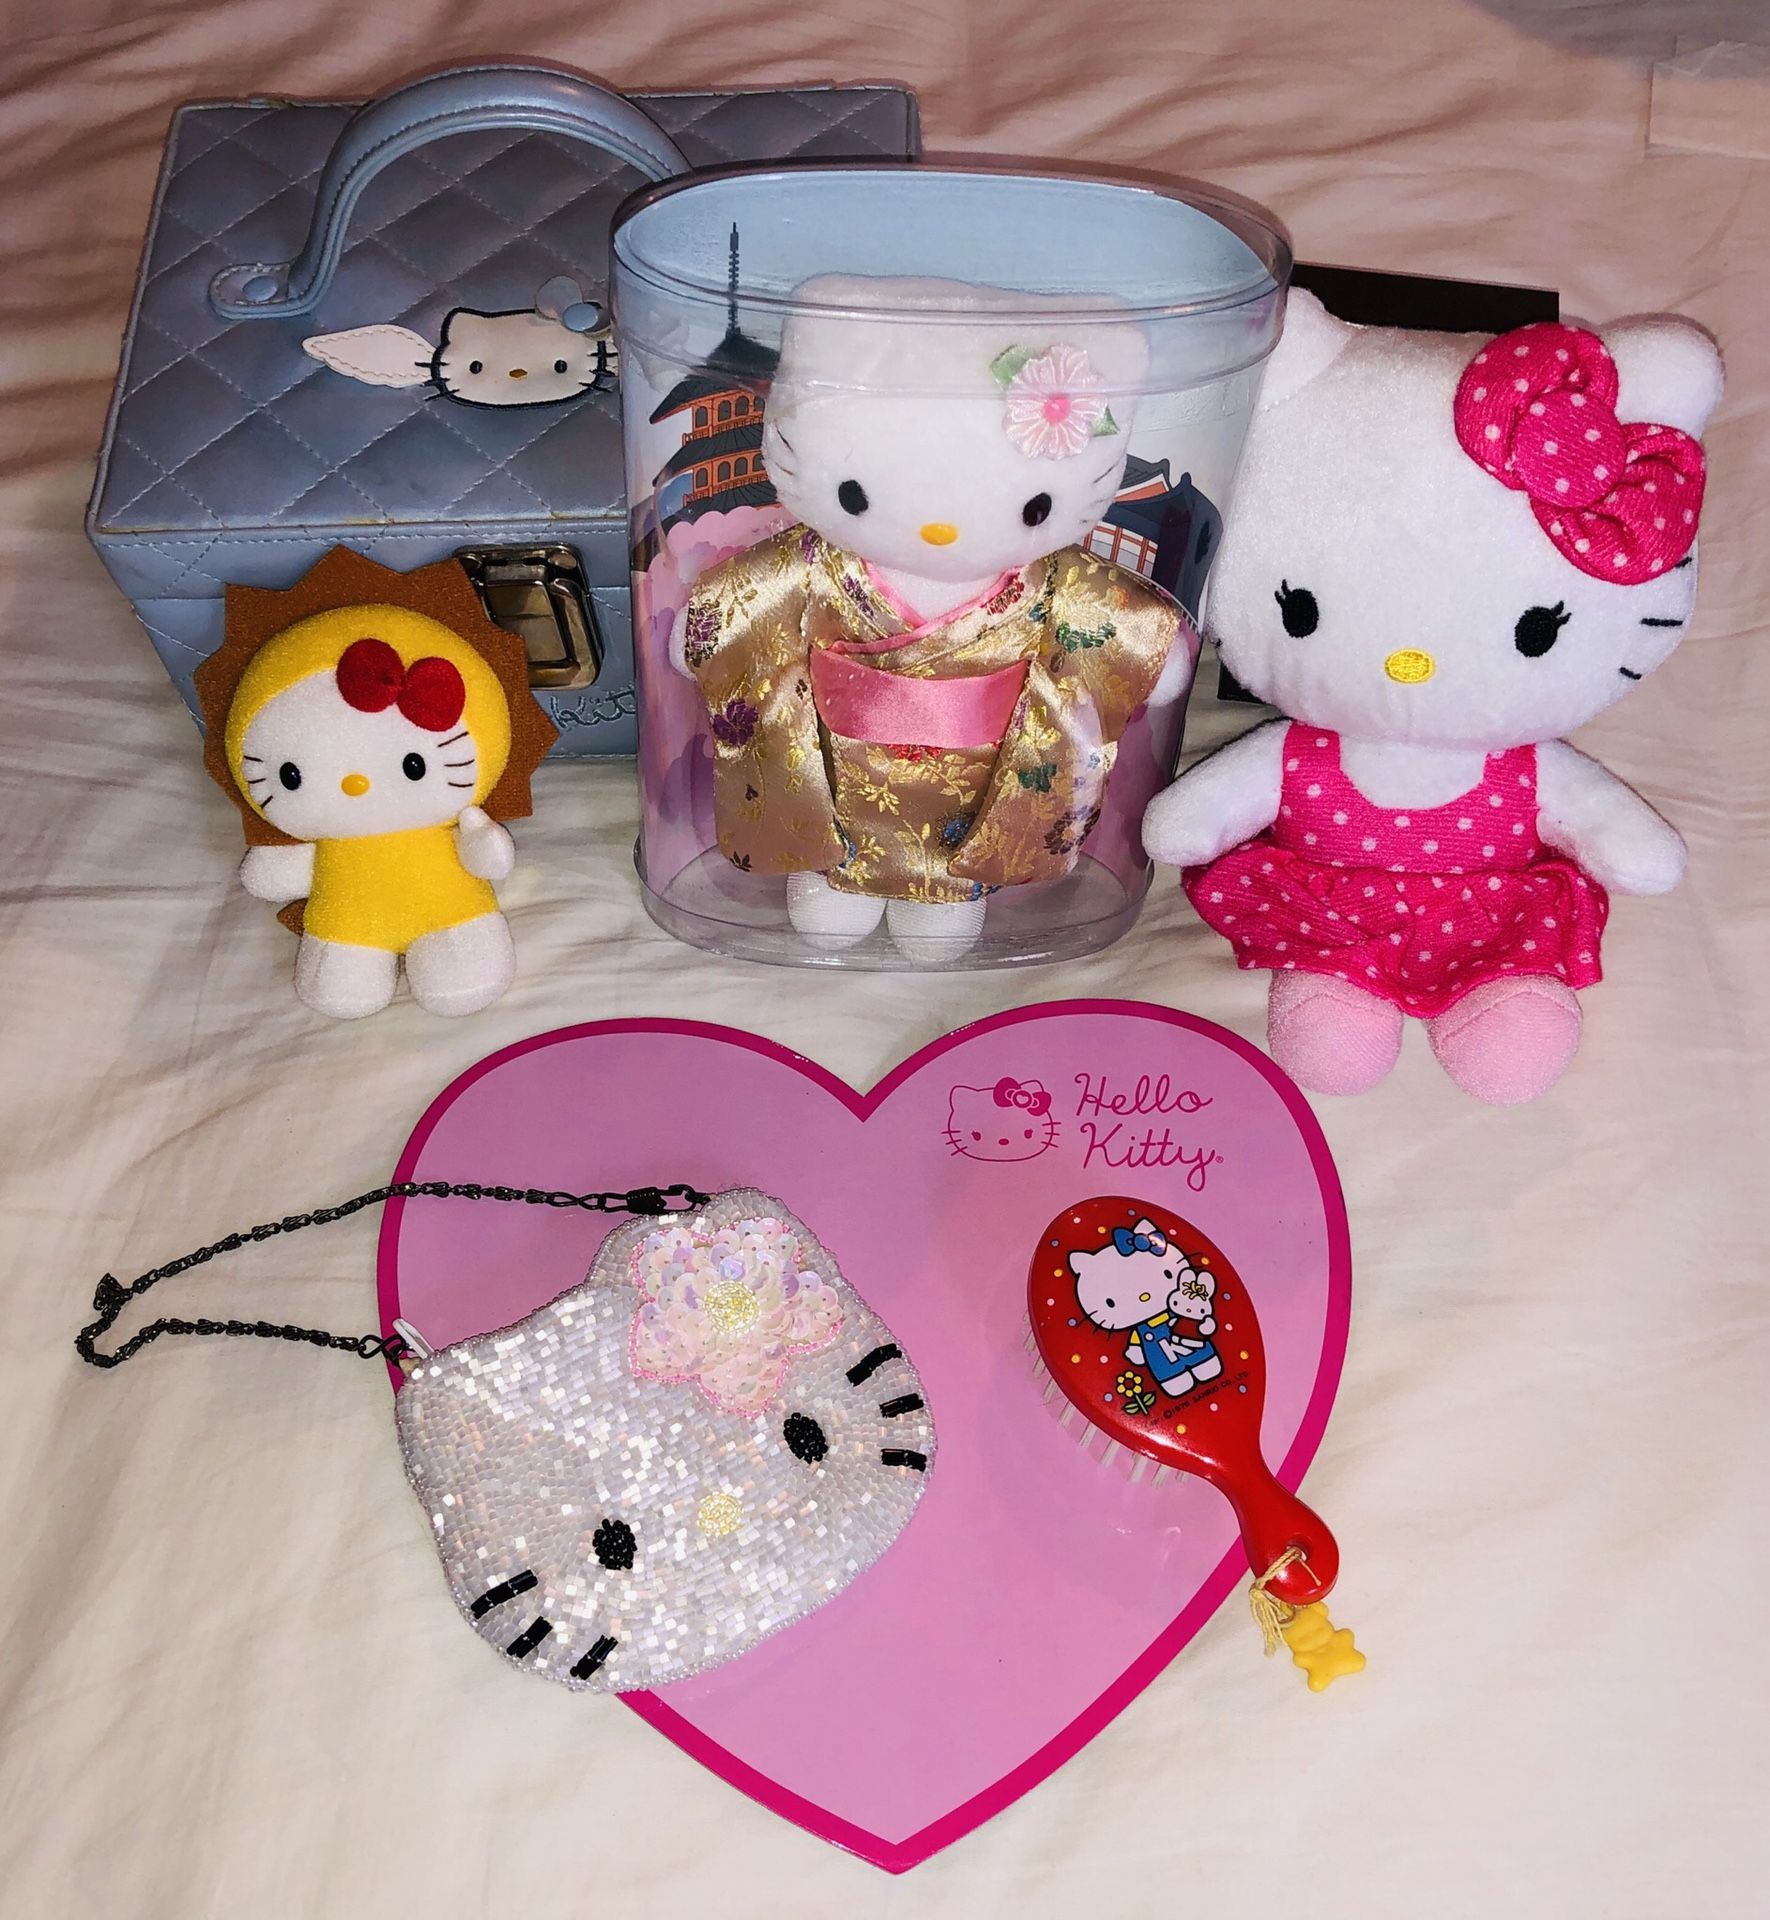 Hello Kitty Set. New from Sanrio Smiles. Purse, brush, dolls, pad, travel box. Free gifts with purchase.